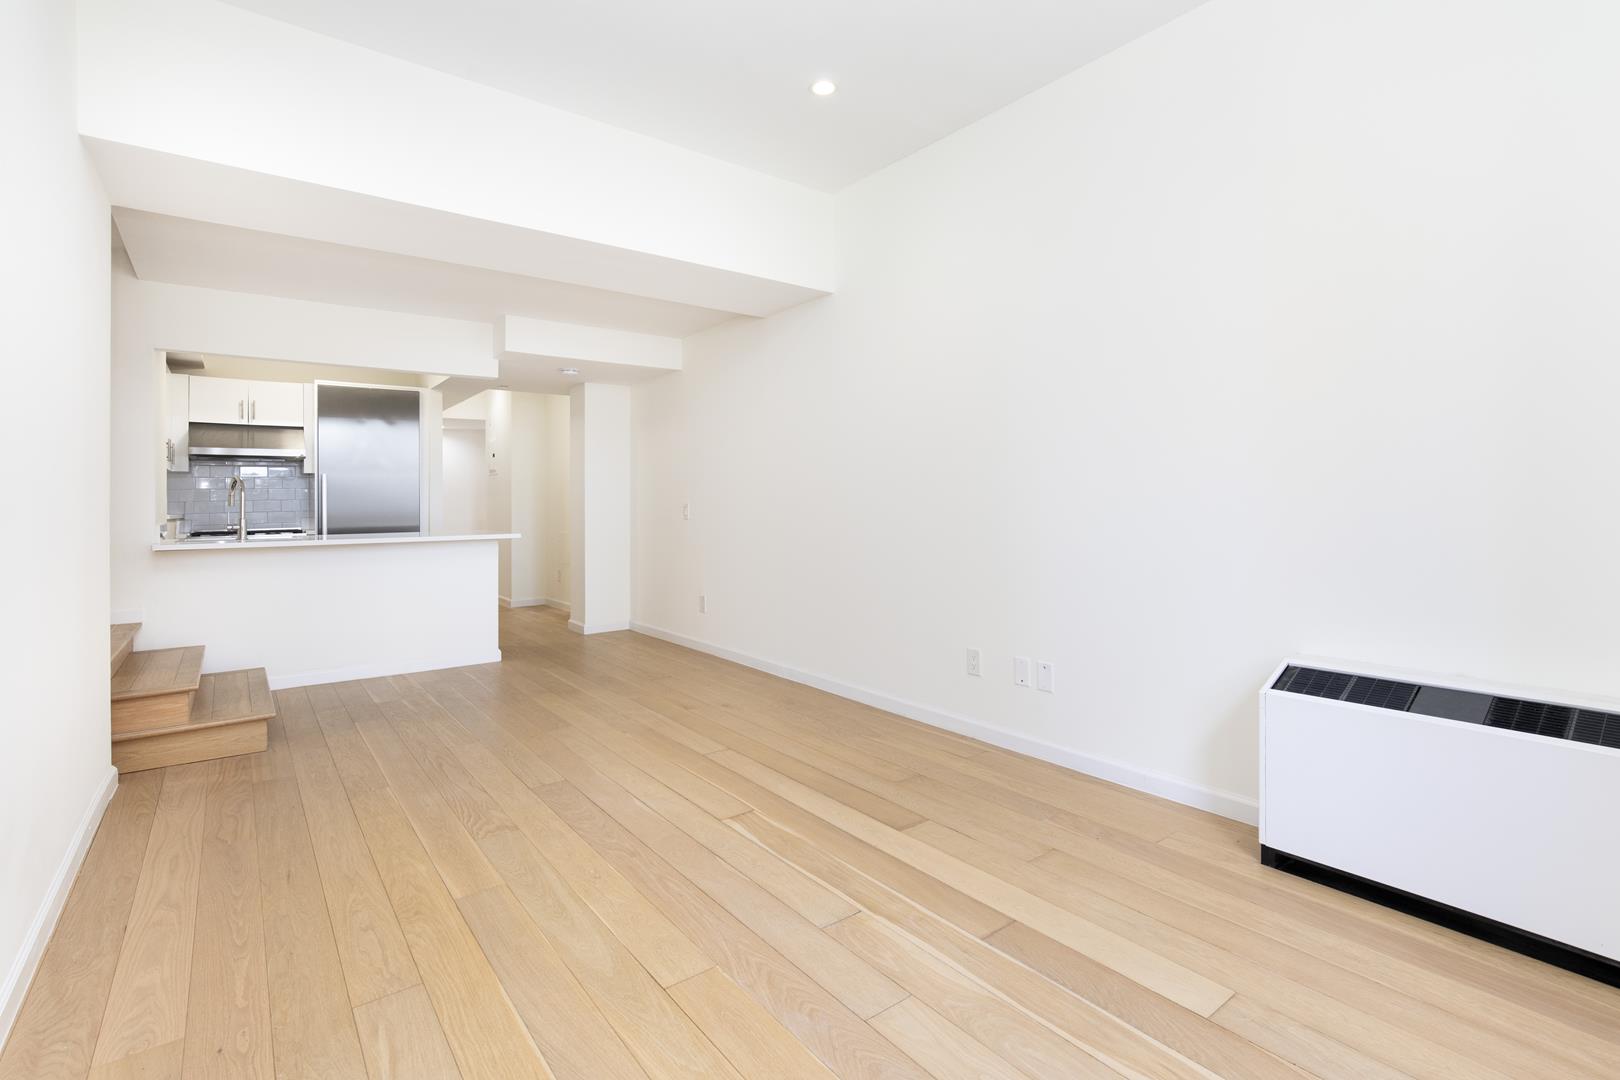 20 West Street 11-A, Financial District, Downtown, NYC - 2 Bedrooms  
2.5 Bathrooms  
4 Rooms - 